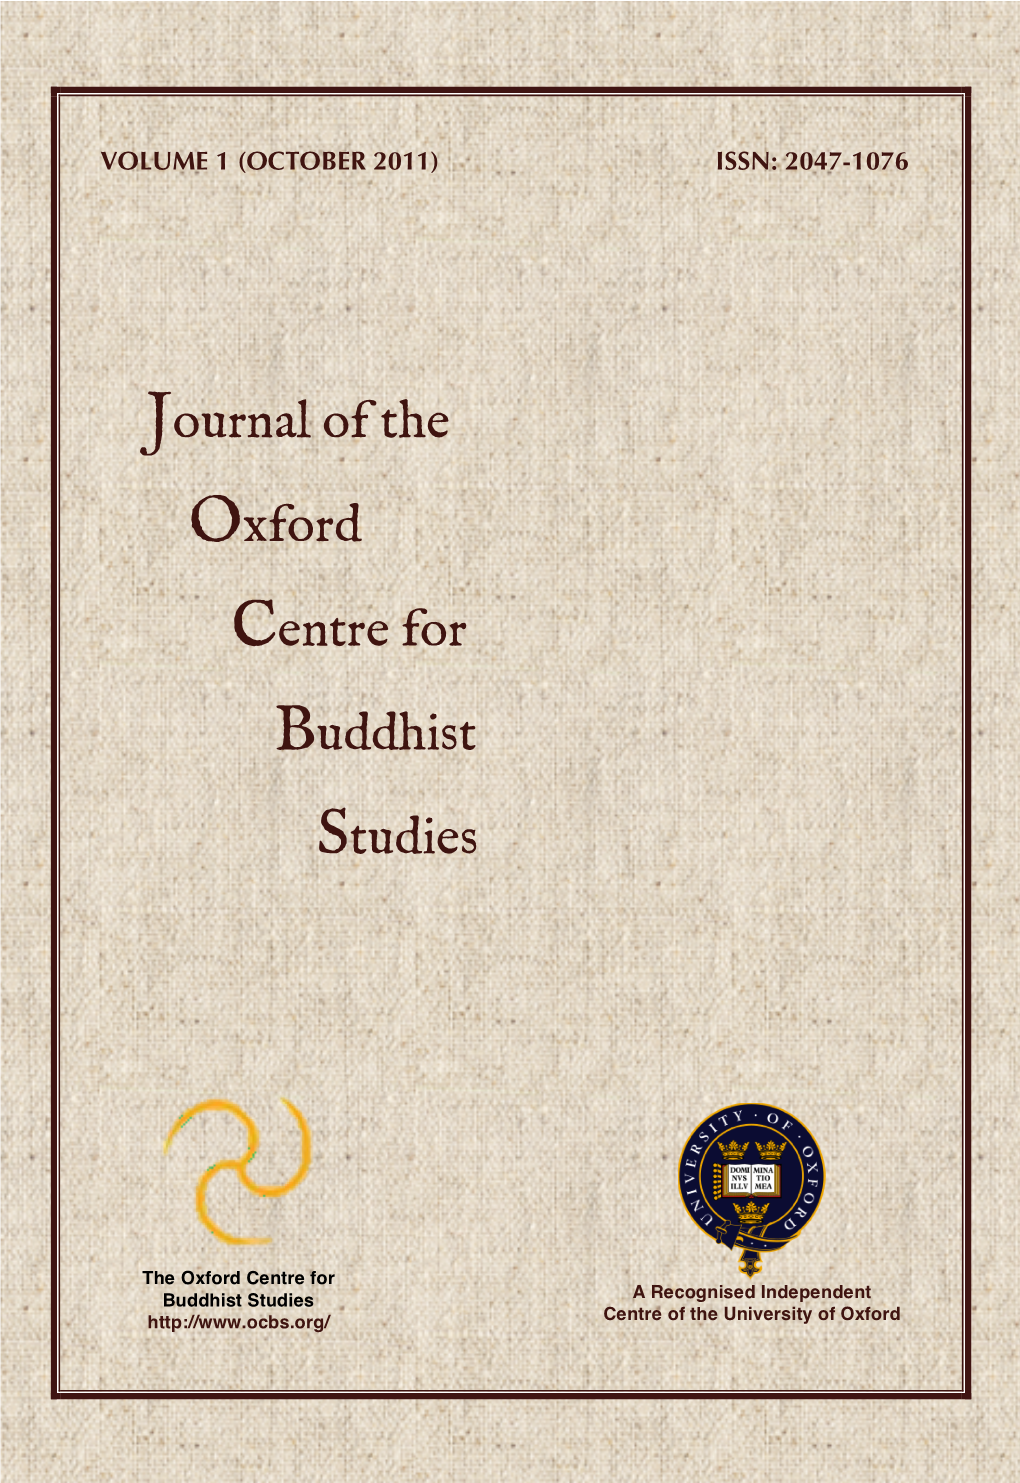 Journal of the Oxford Centre for Buddhist Studies